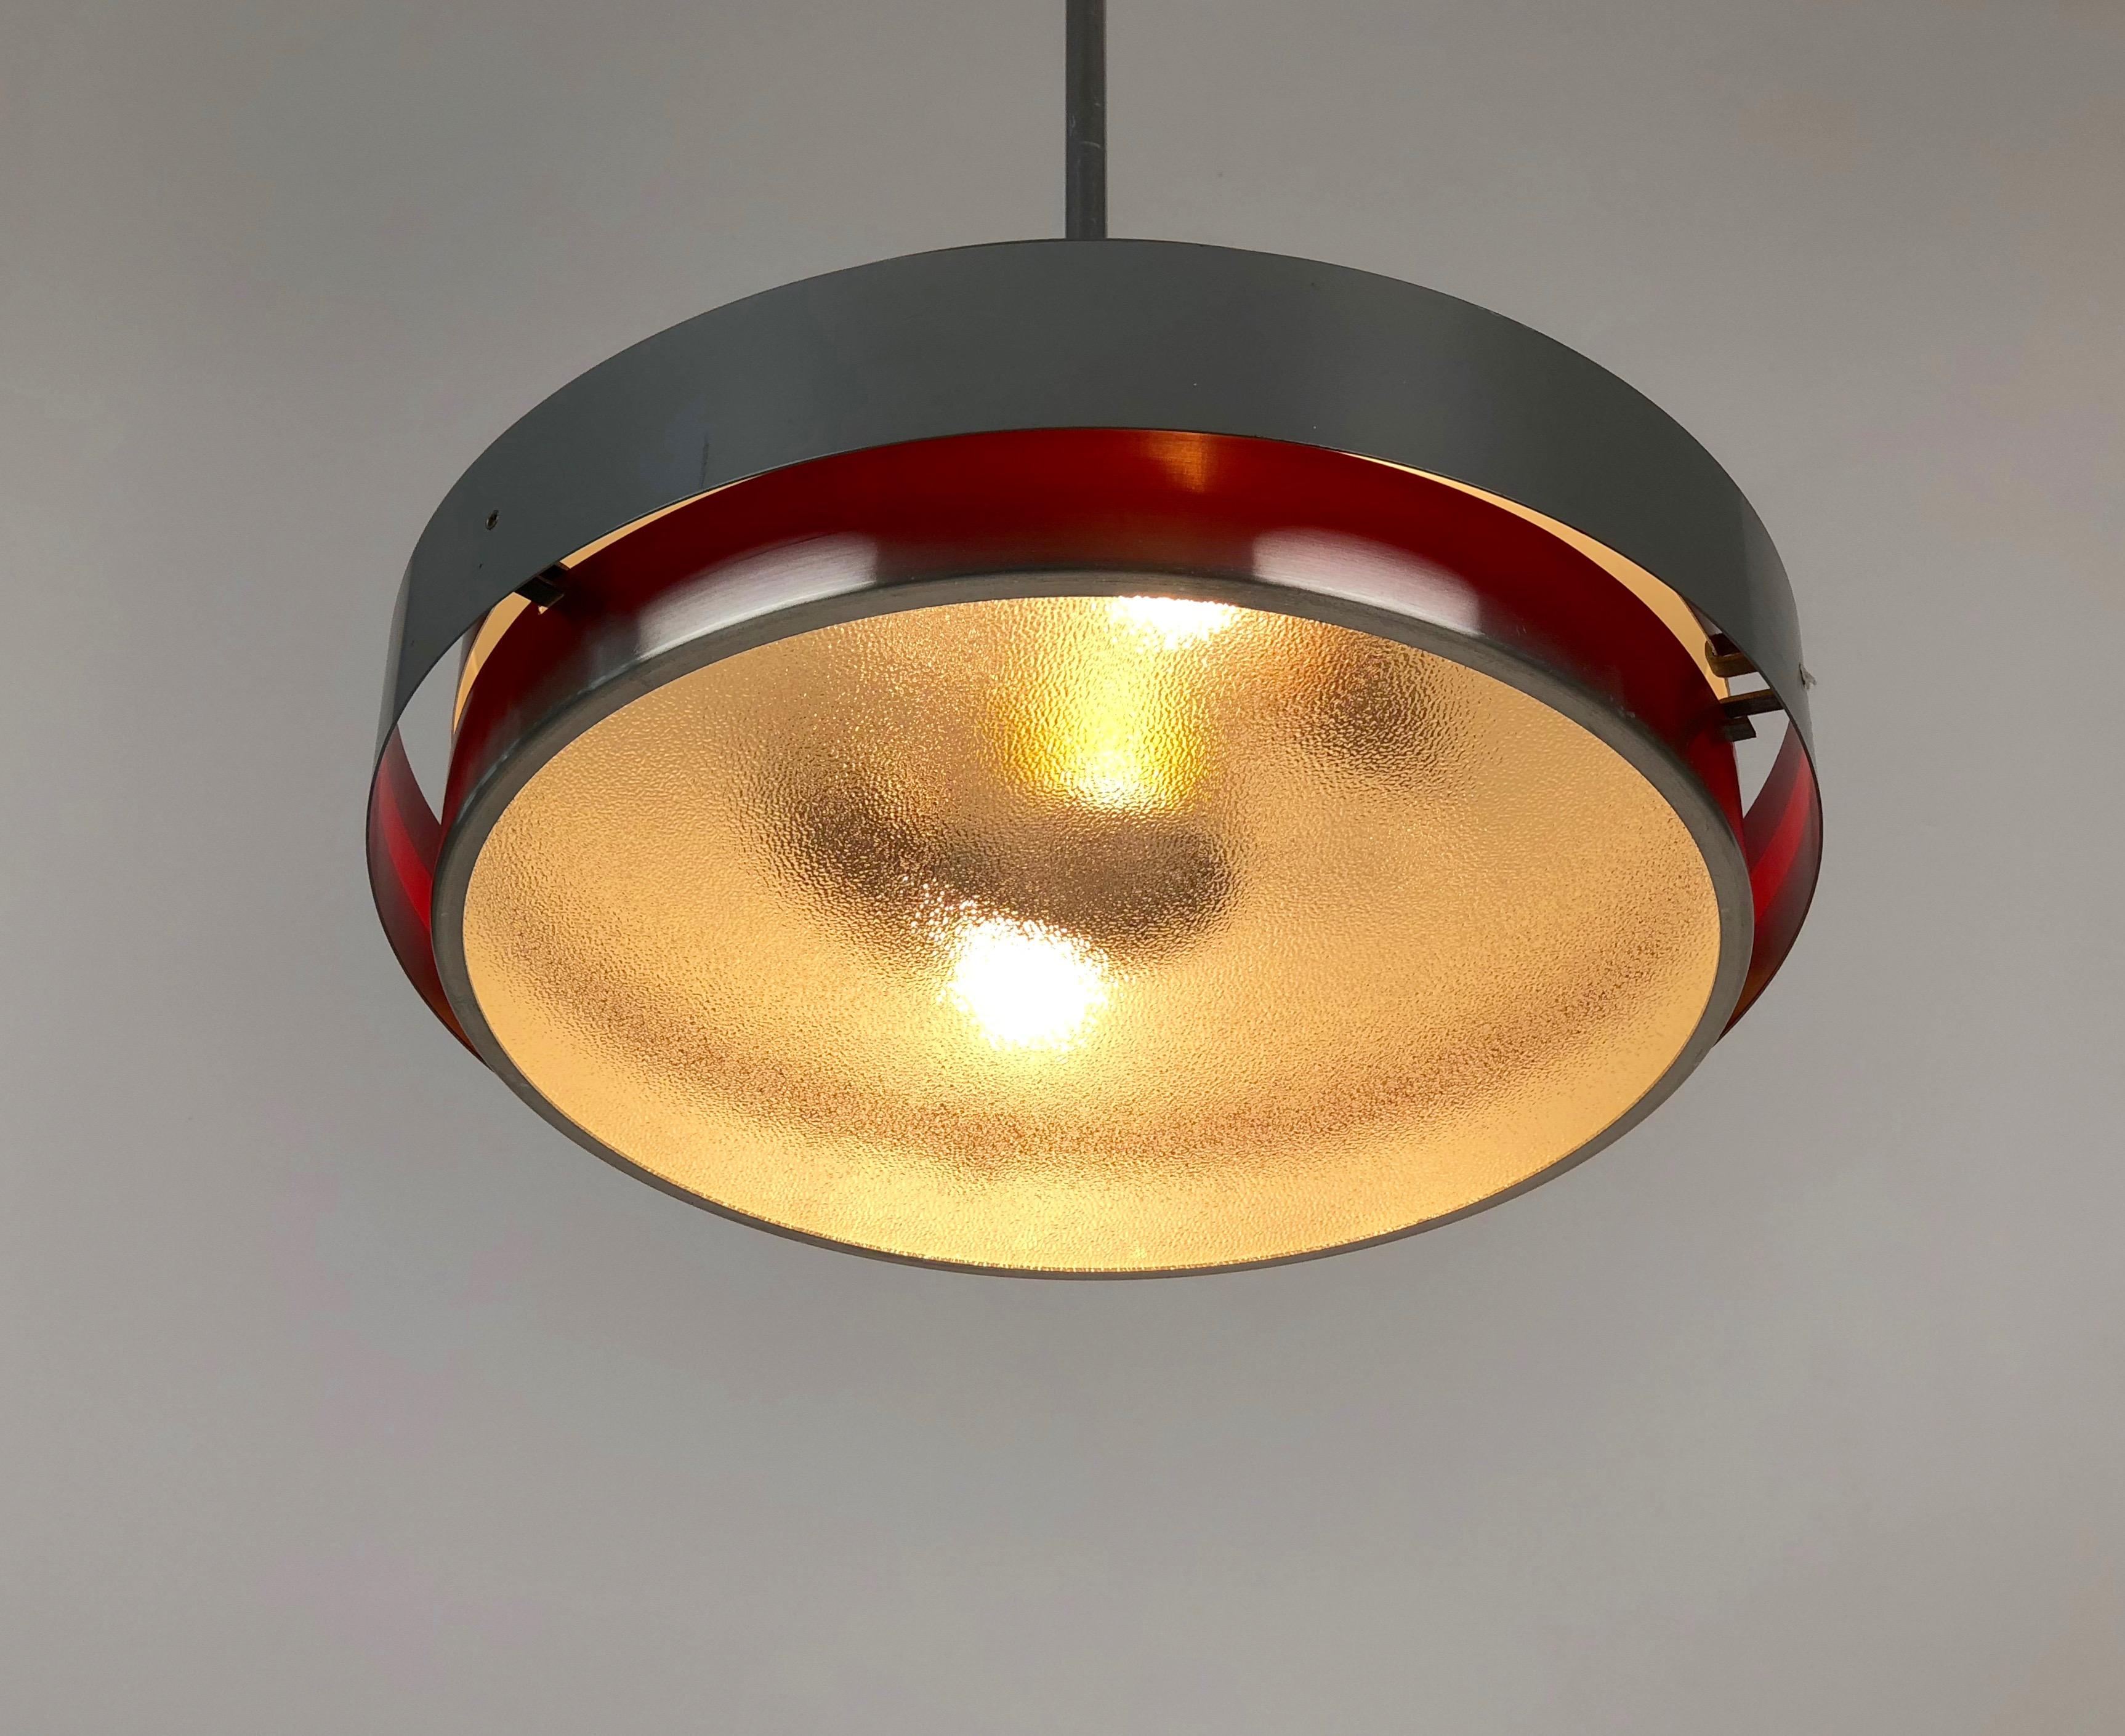 Simple pendant-lamp made in aluminium with satin glass disc.
The equator is outside grey and inside red lacquered, this effect is visible when the lamp is illuminated.
The lamp is in a very good condition.